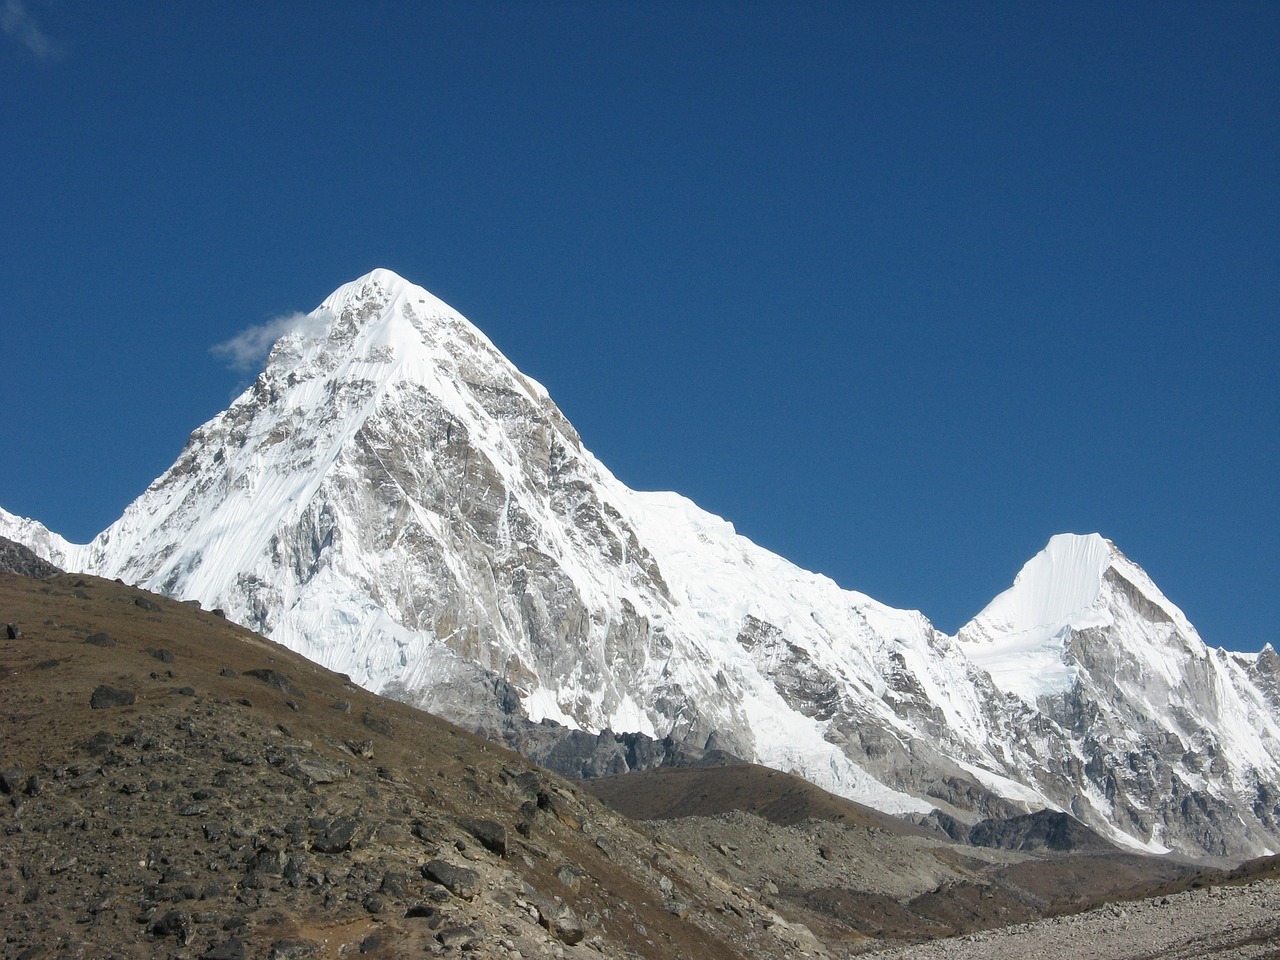 How difficult is the Everest Base Camp Trek